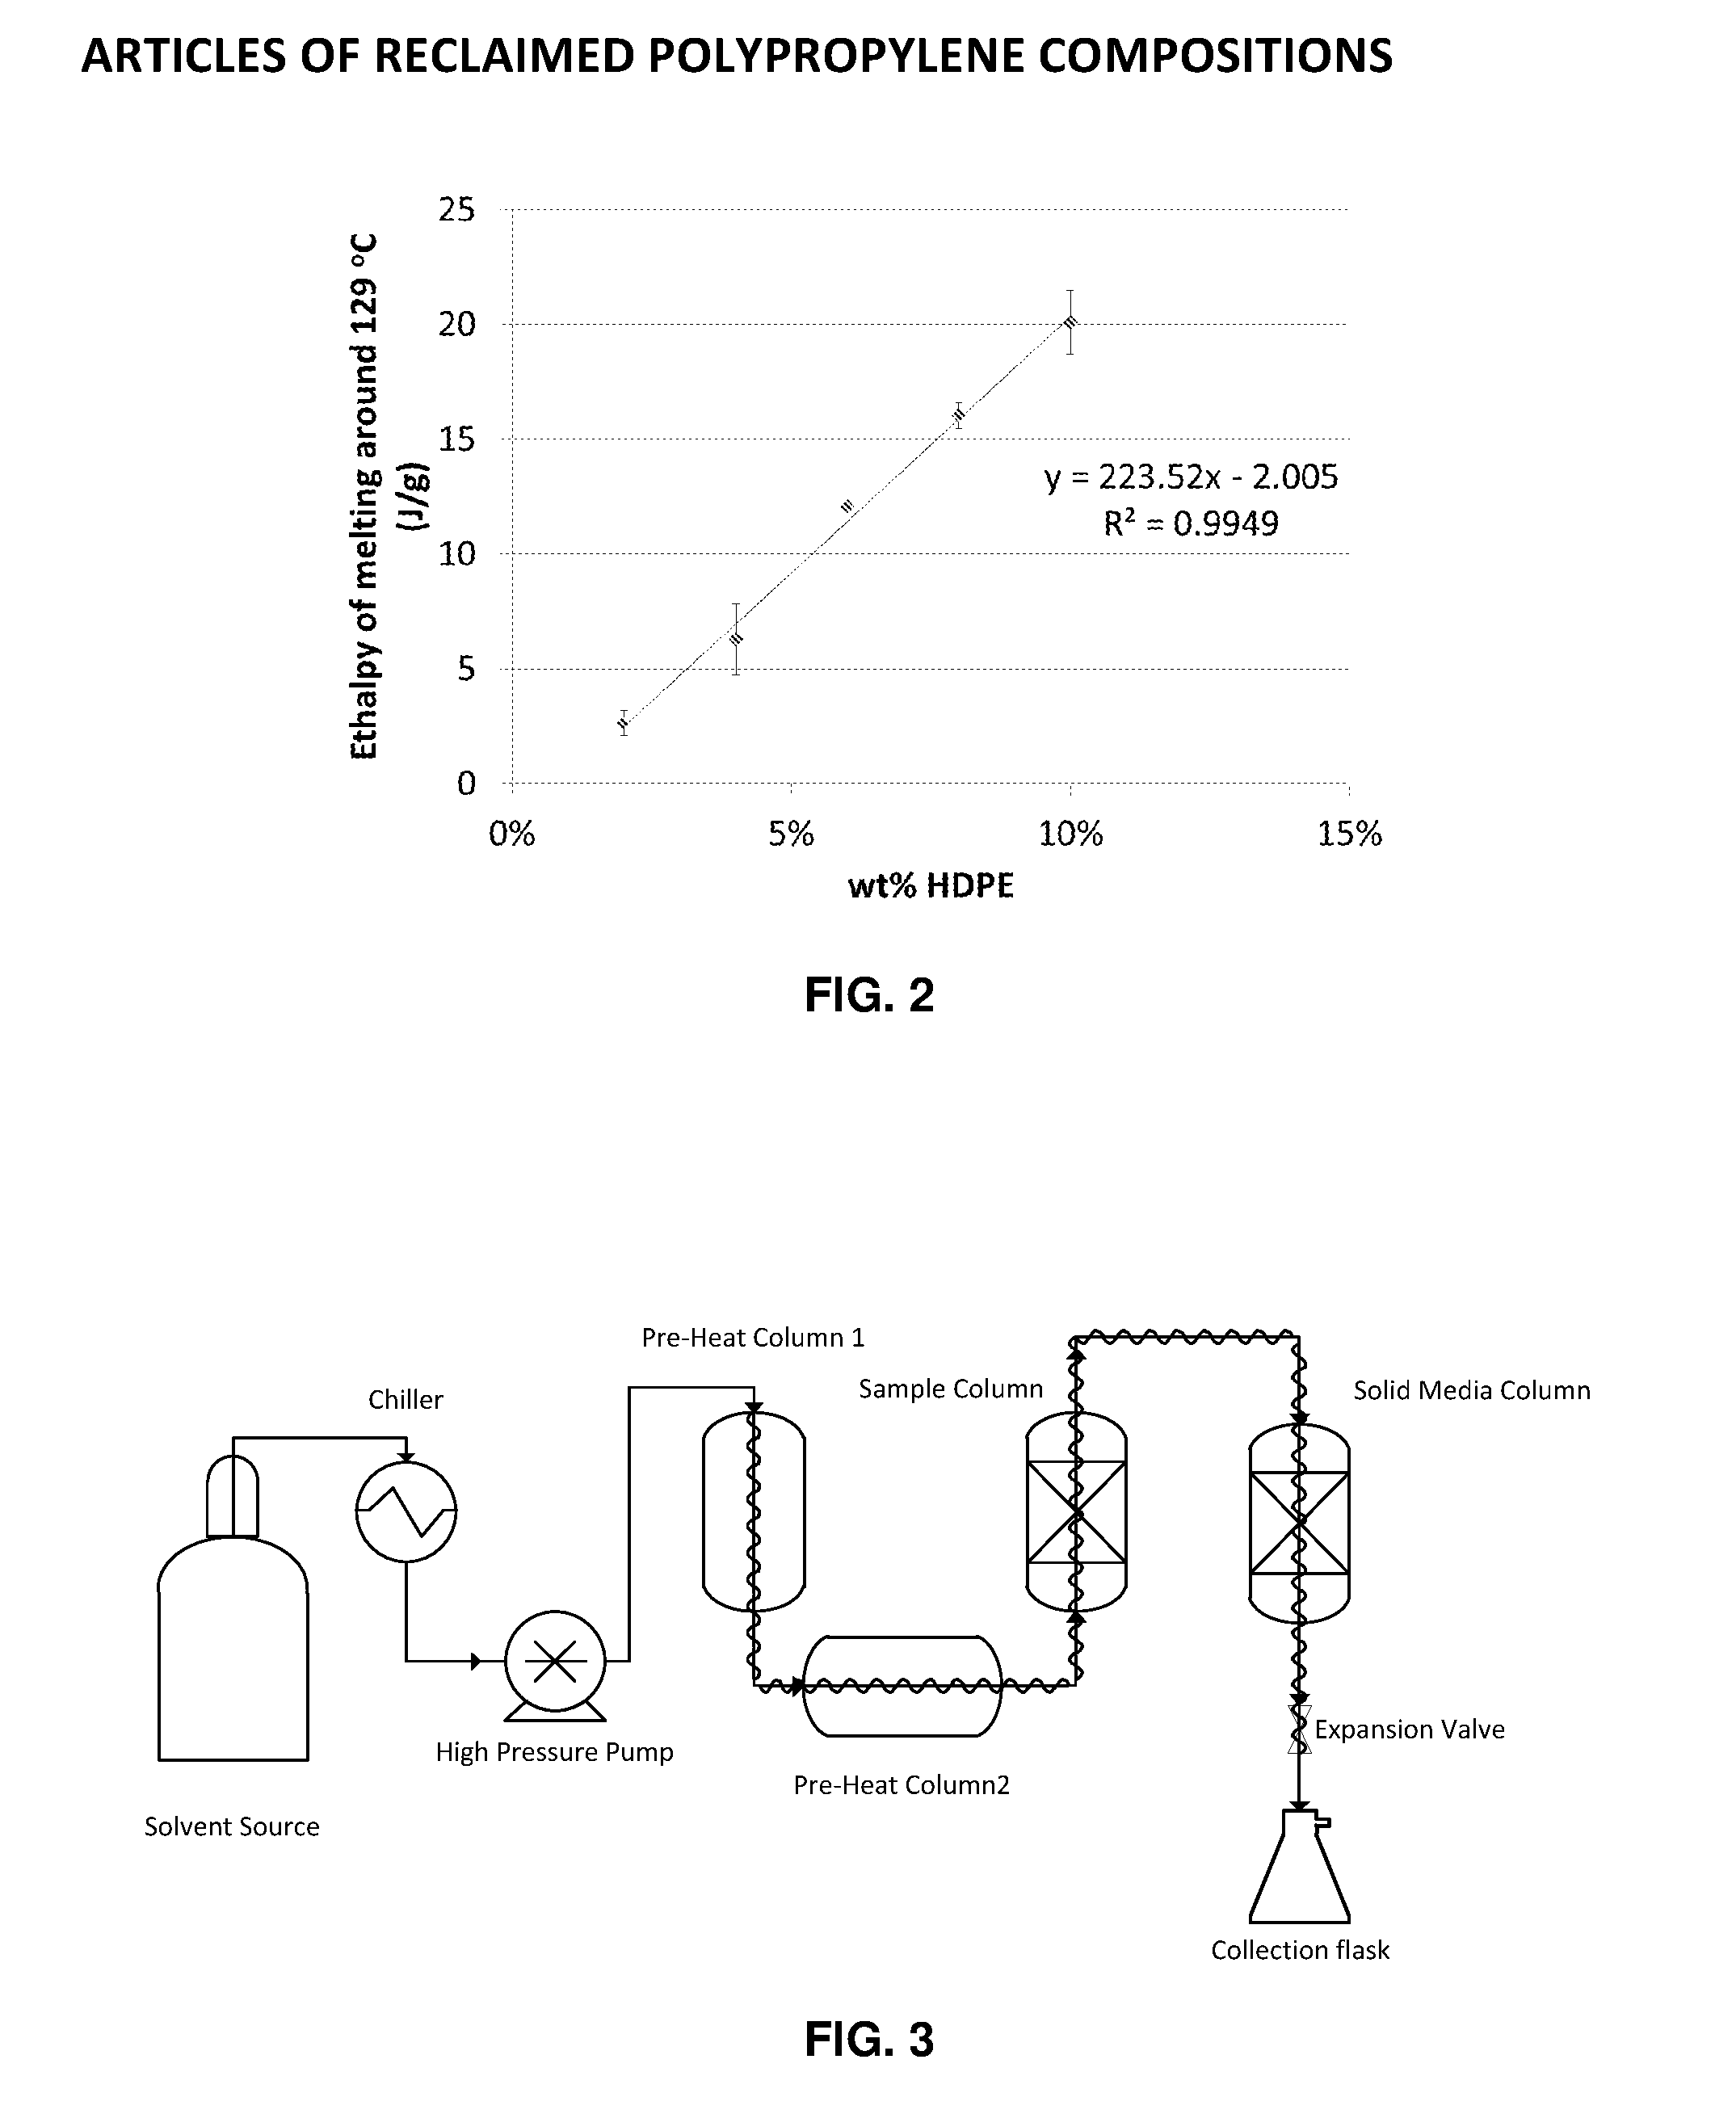 Articles of Reclaimed Polypropylene Compositions